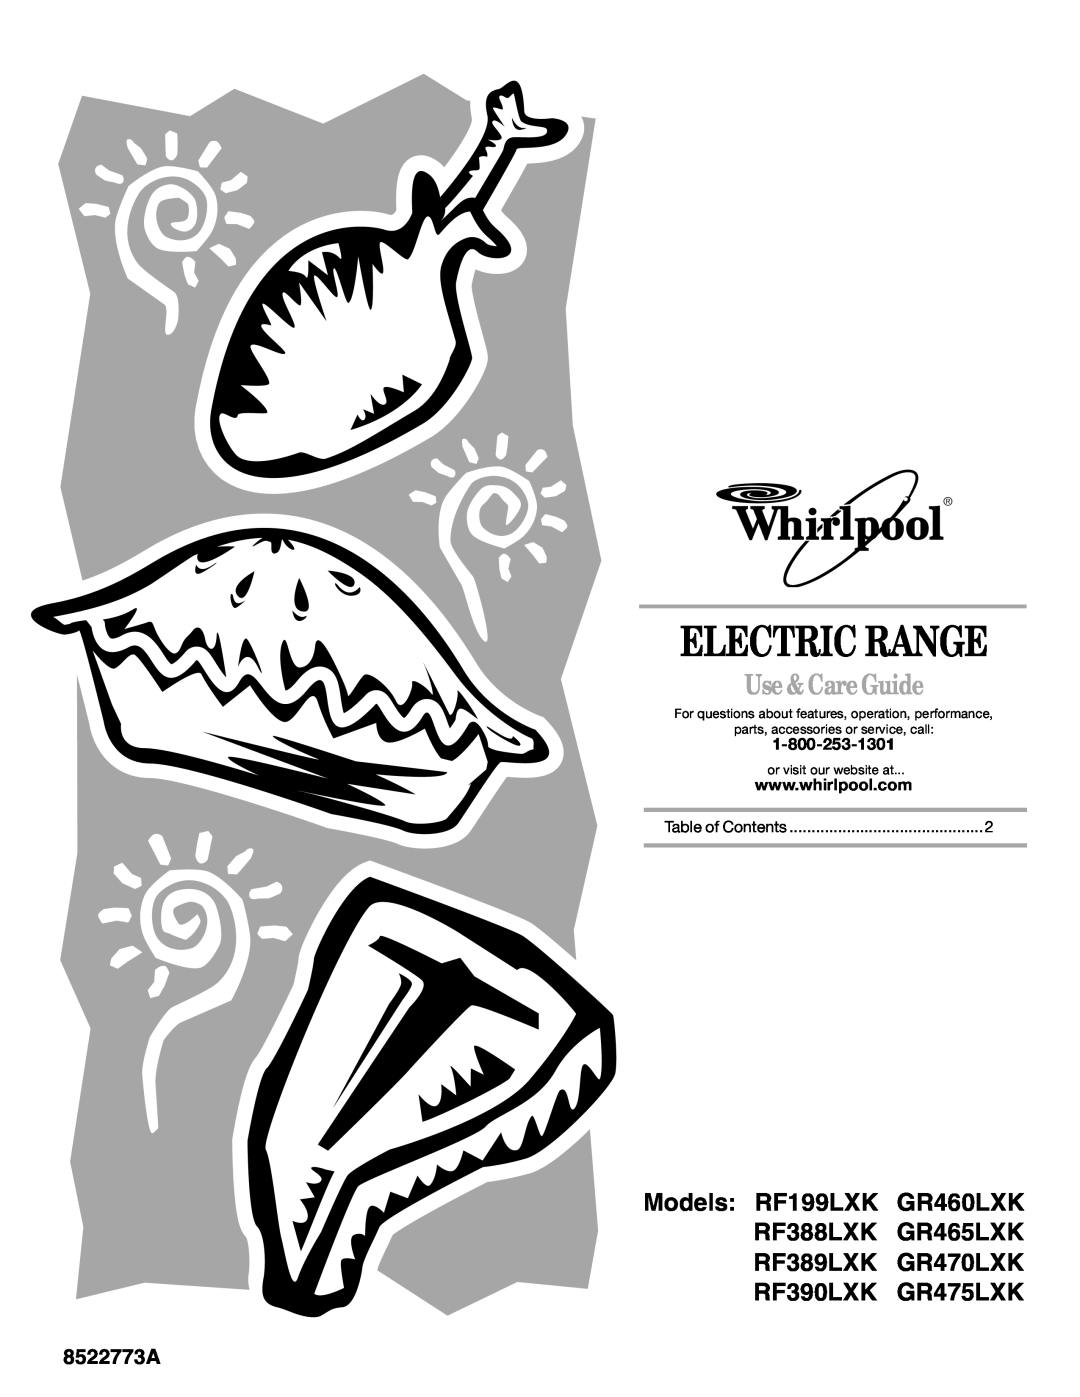 Whirlpool RF388LXK, RF389LXK manual Electric Range, Use & CareGuide, 8522773A, RF390LXK GR475LXK, or visit our website at 